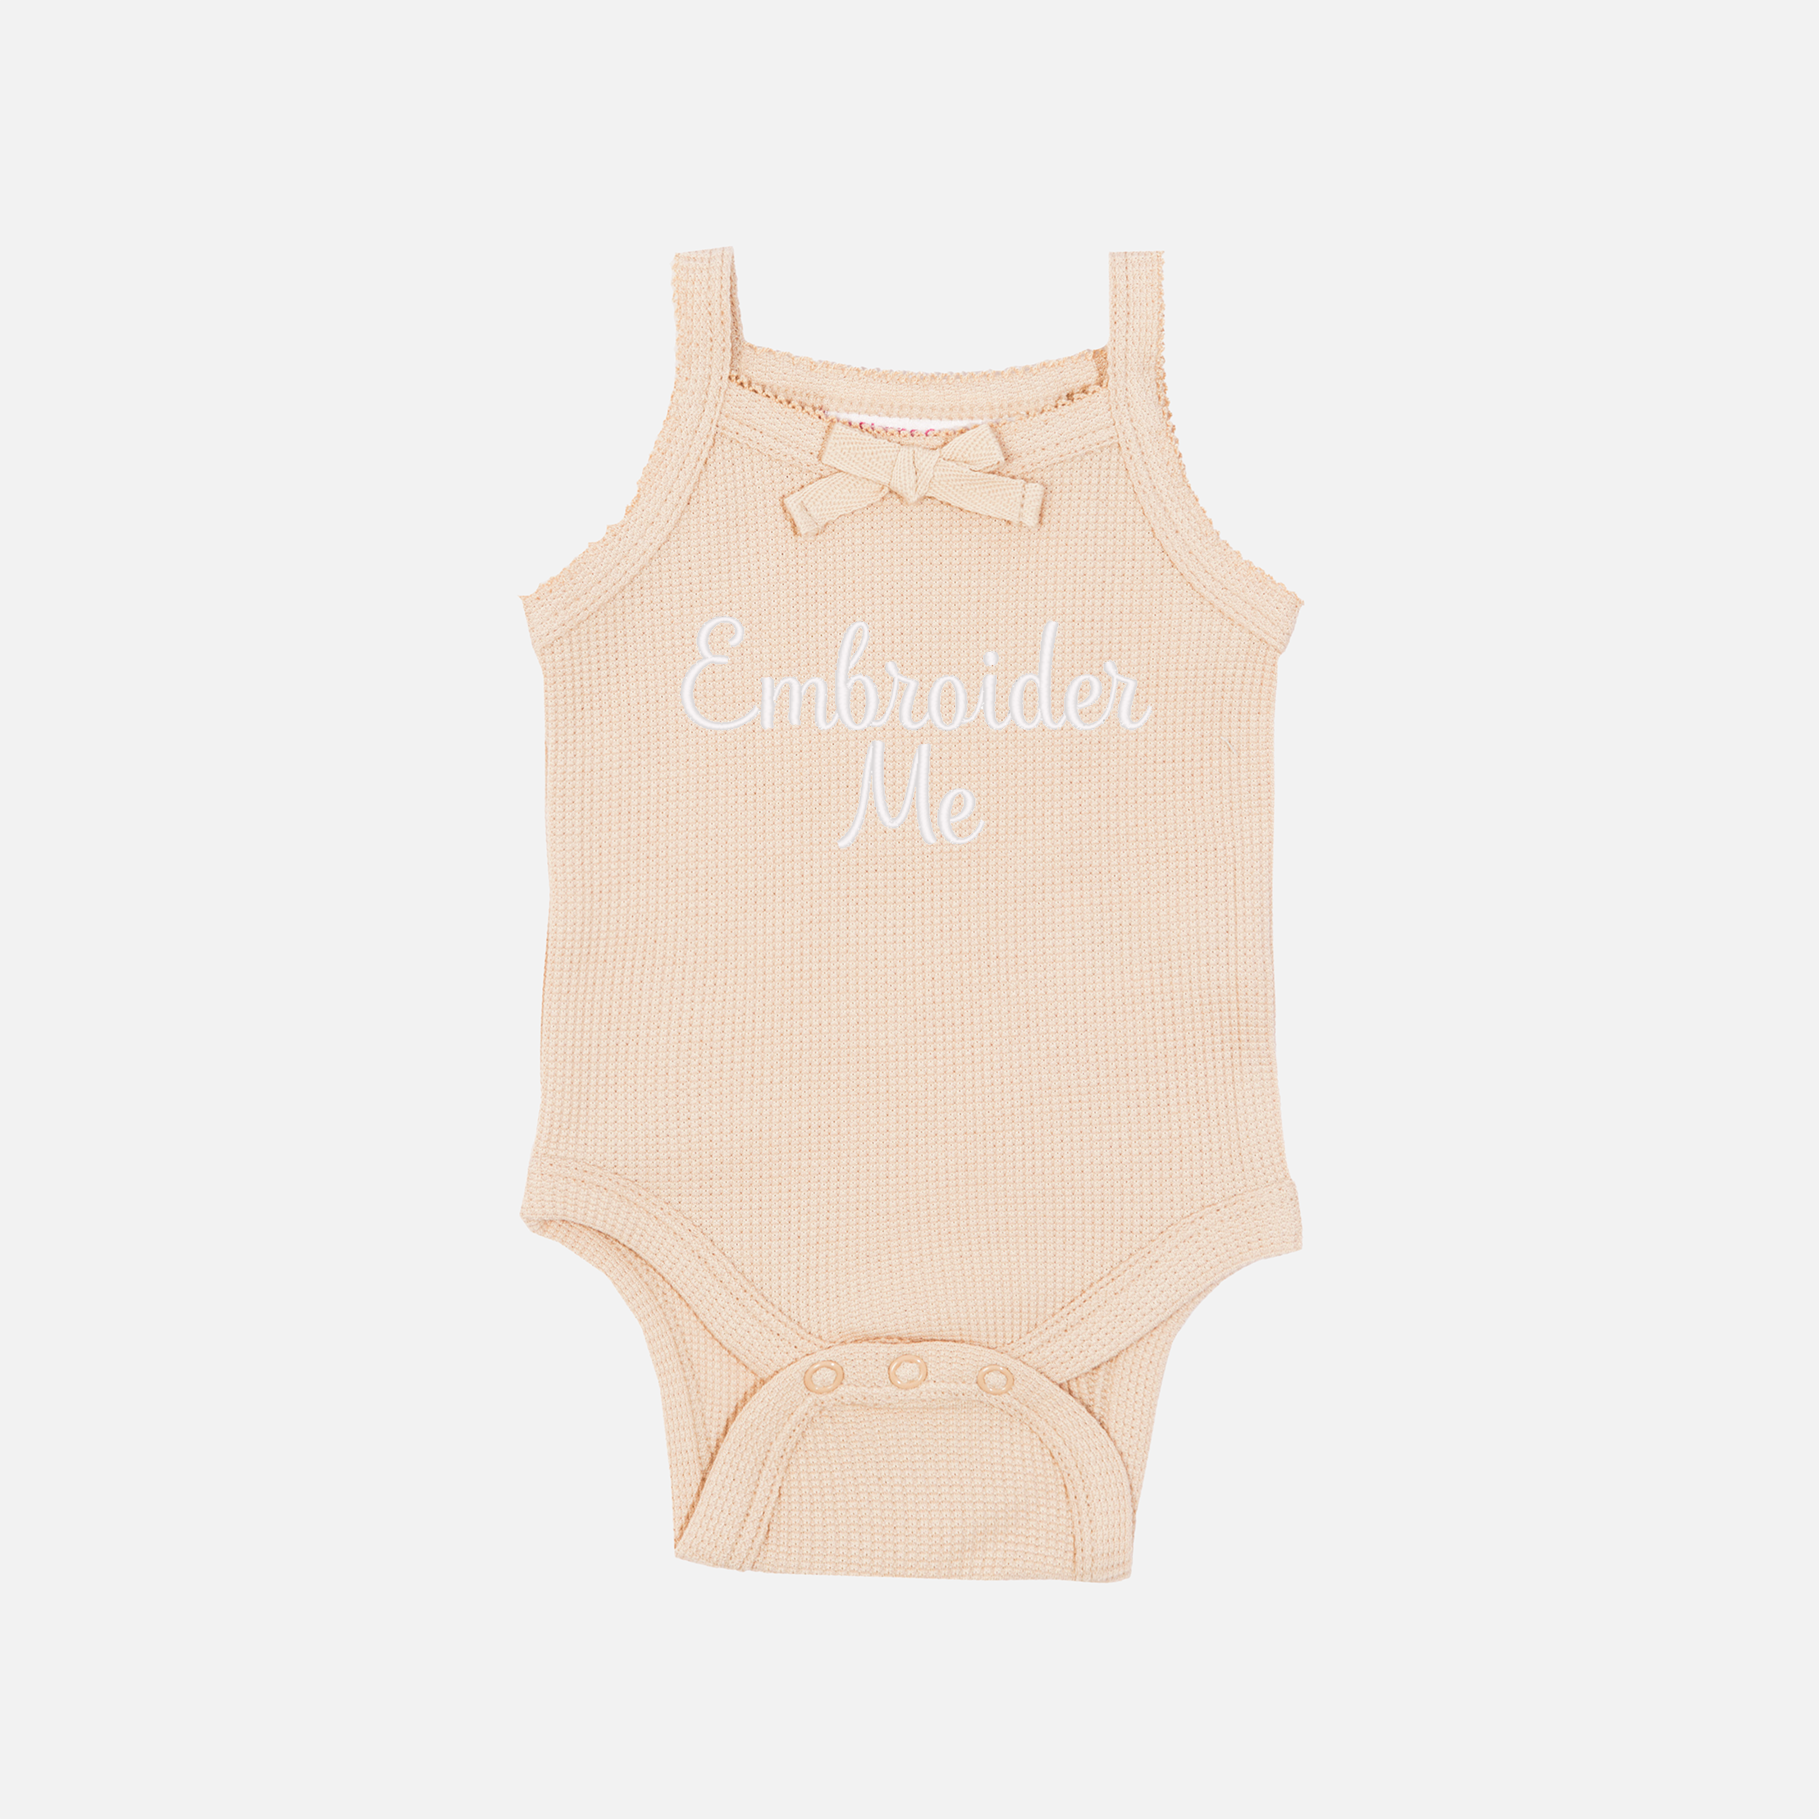 Embroidered Dainty Waffle Singlet - Oatmeal